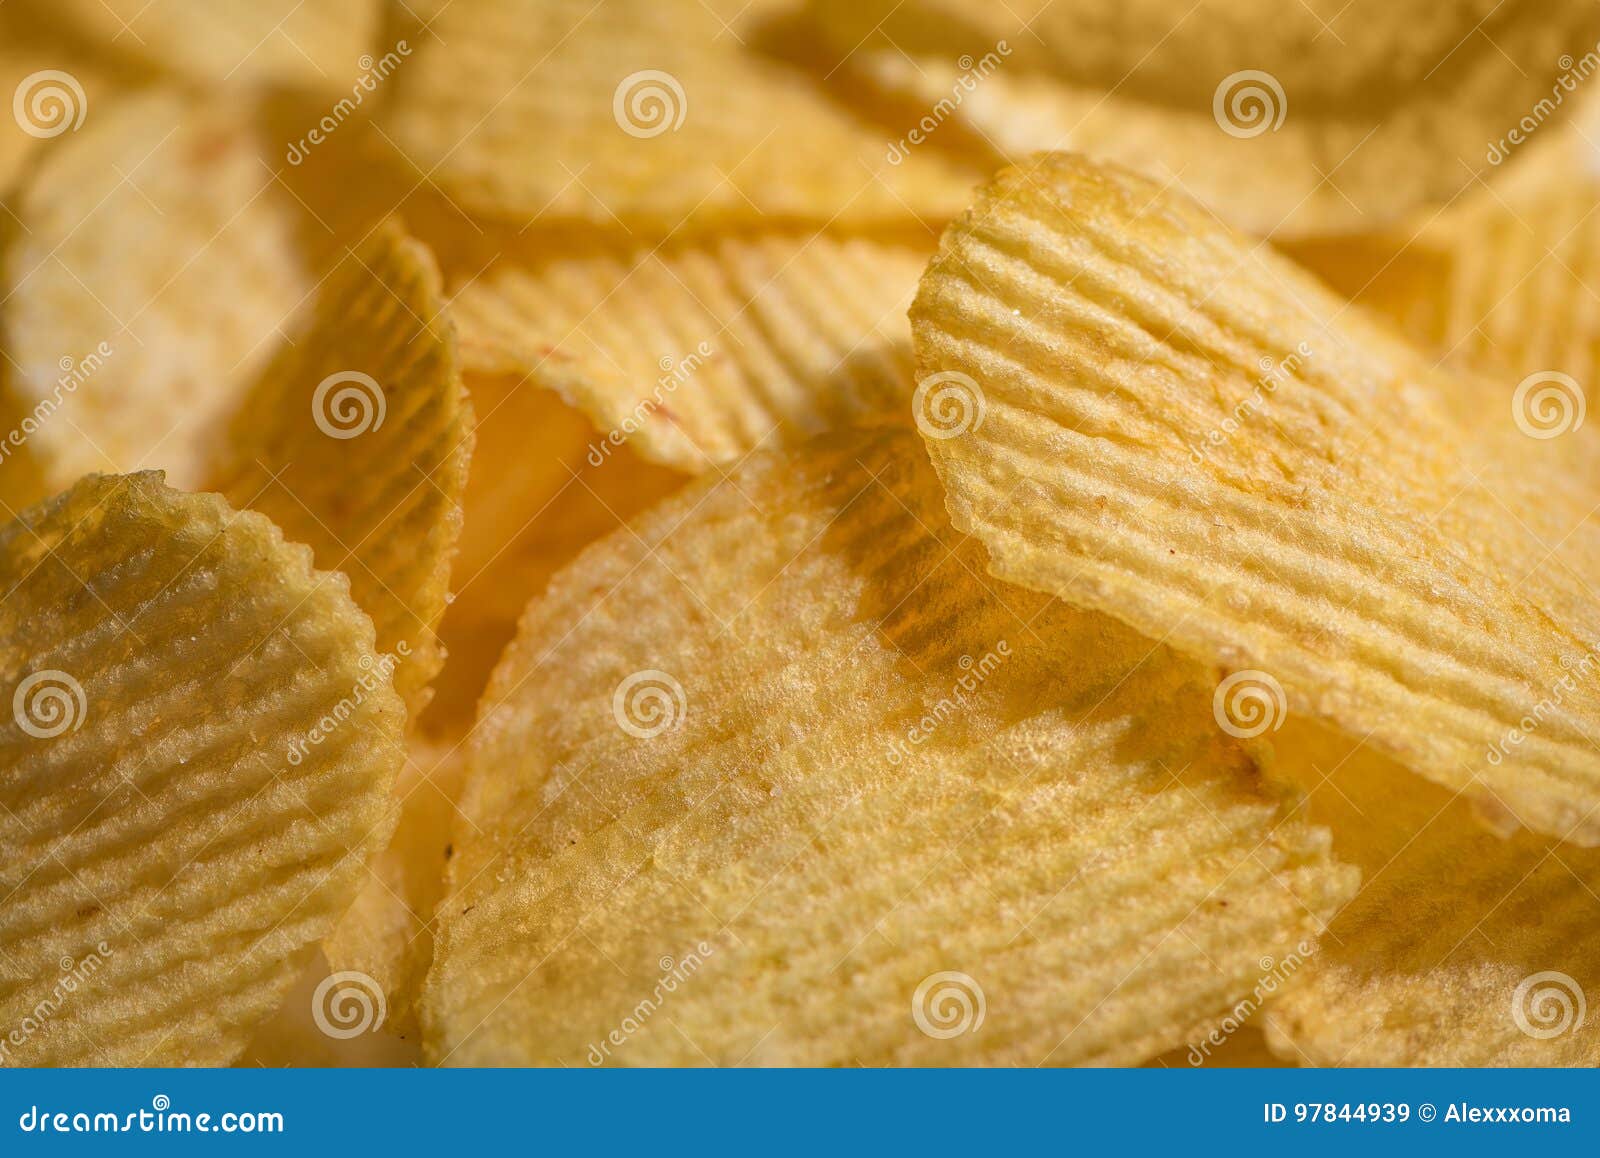 coseup macro crunchy chips background with clearly texture for wallpaper, for cover, for banner